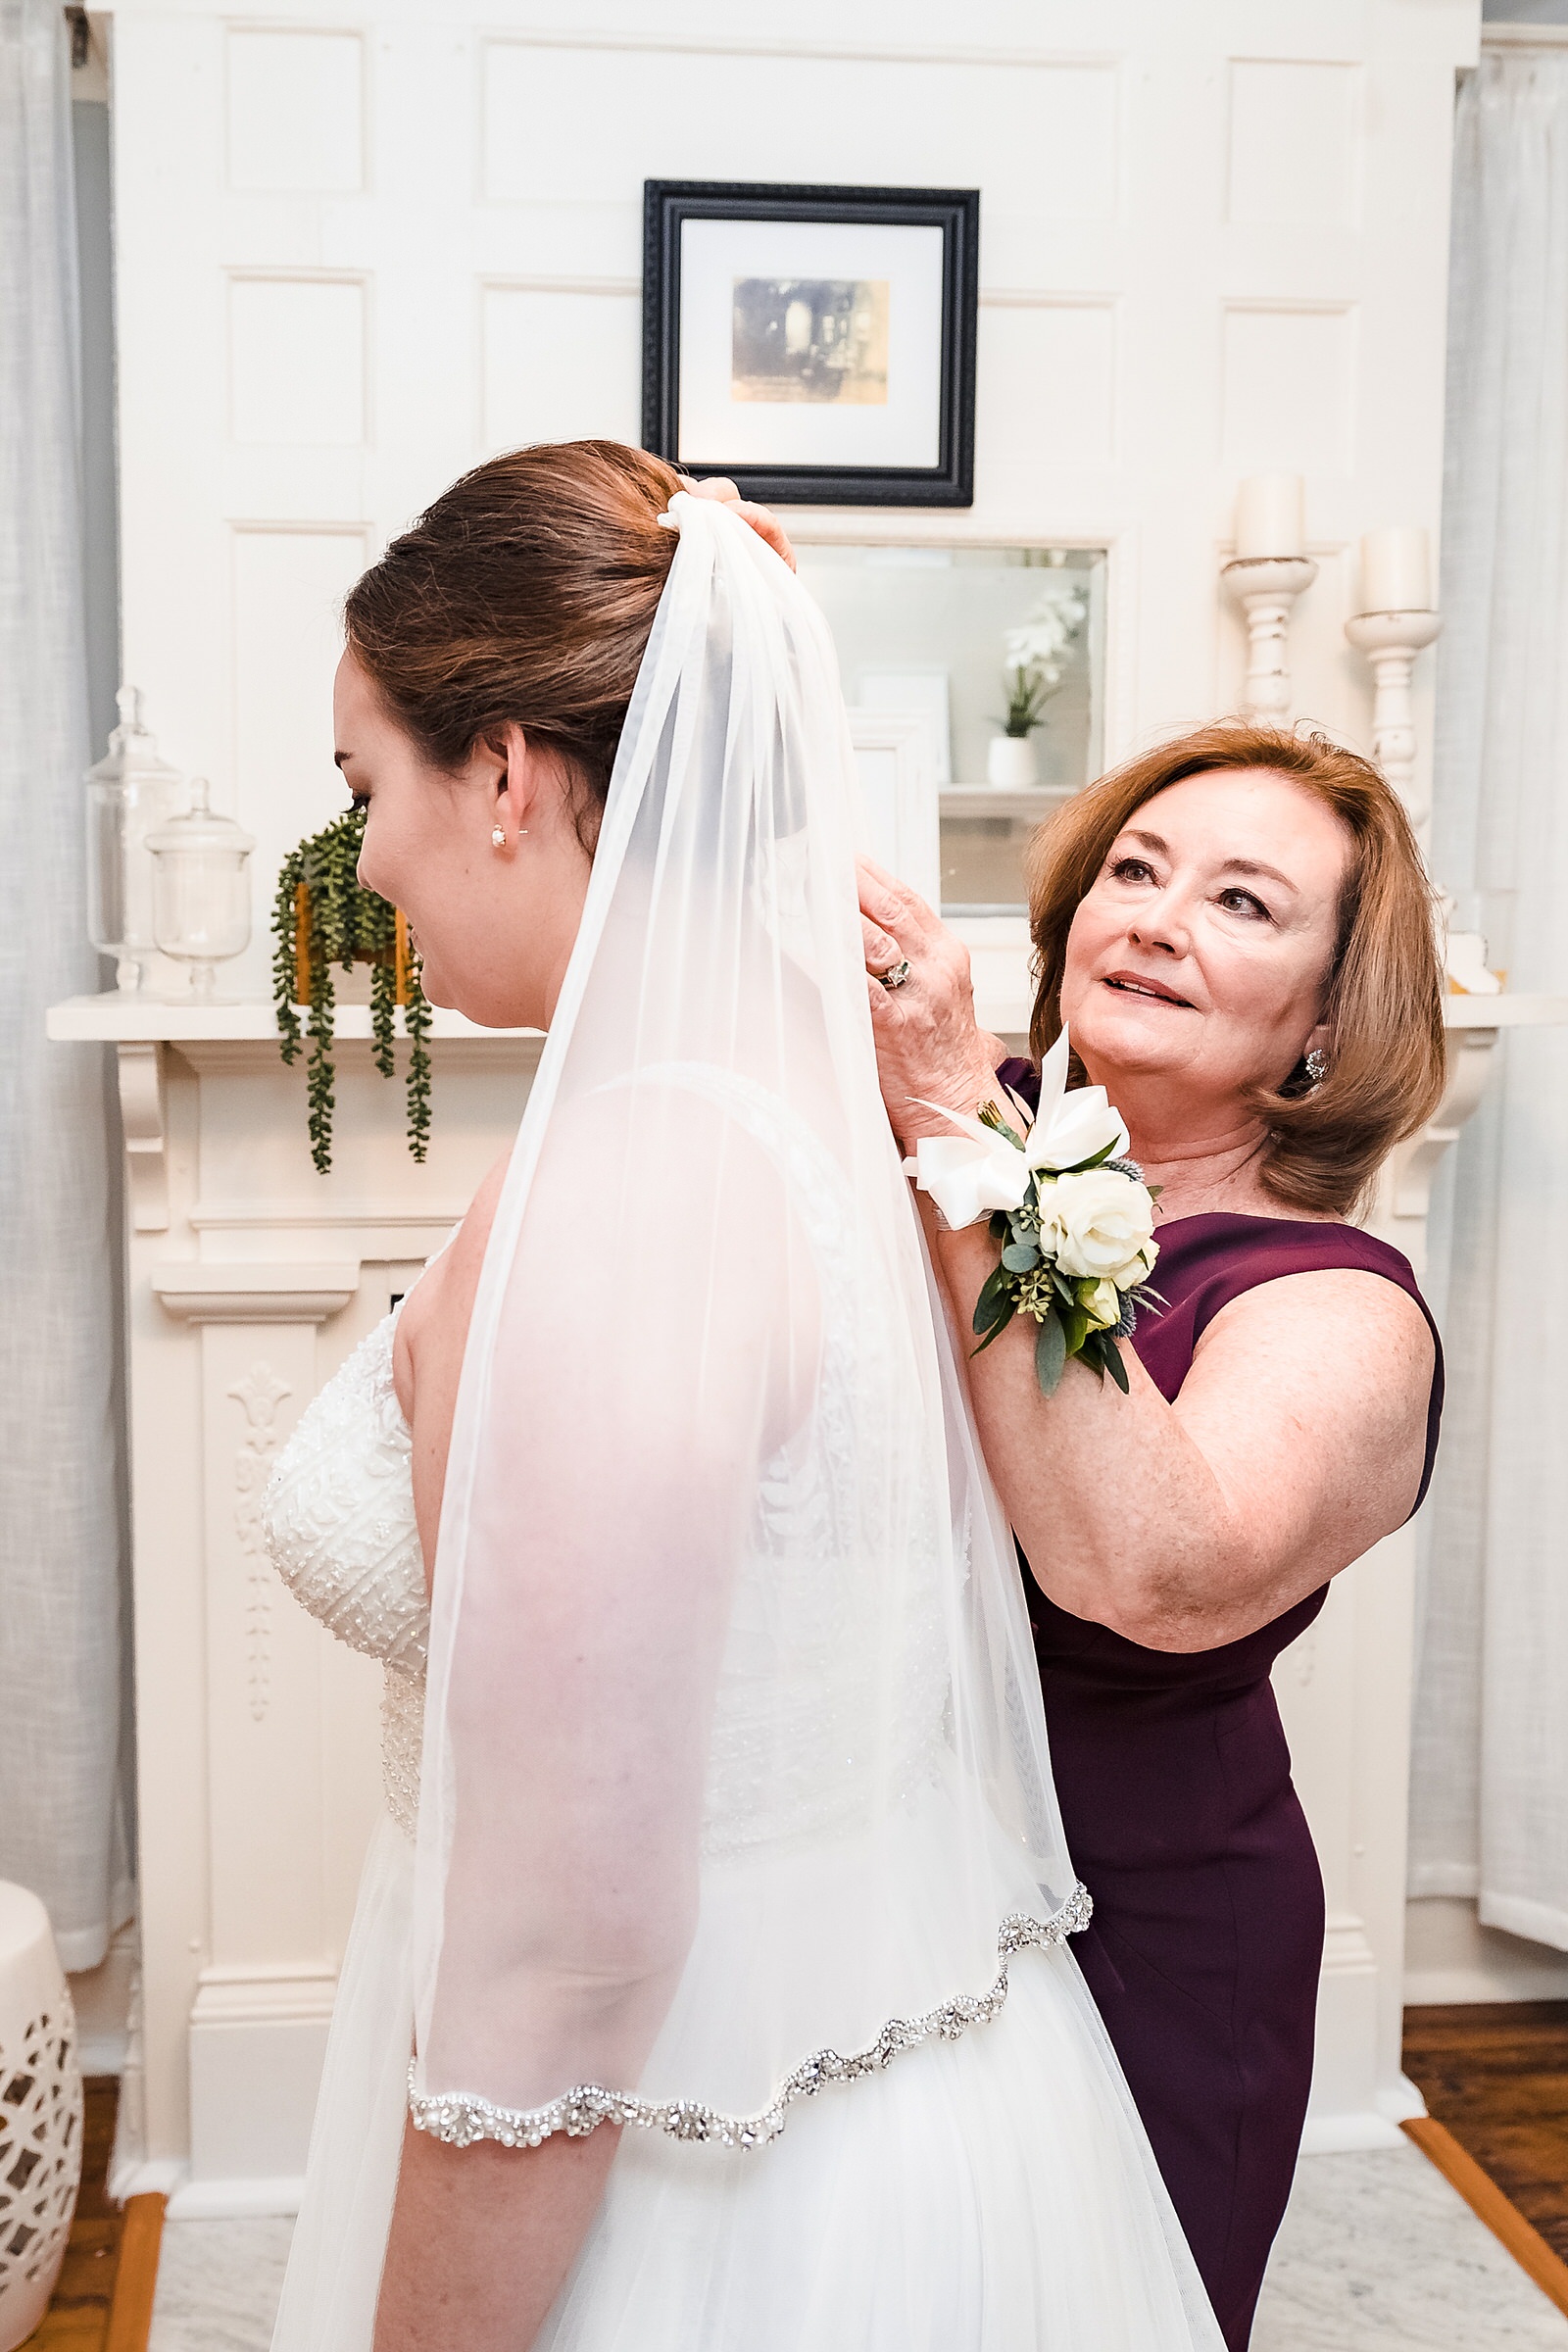 Mother of the bride puts on her daughter's wedding veil